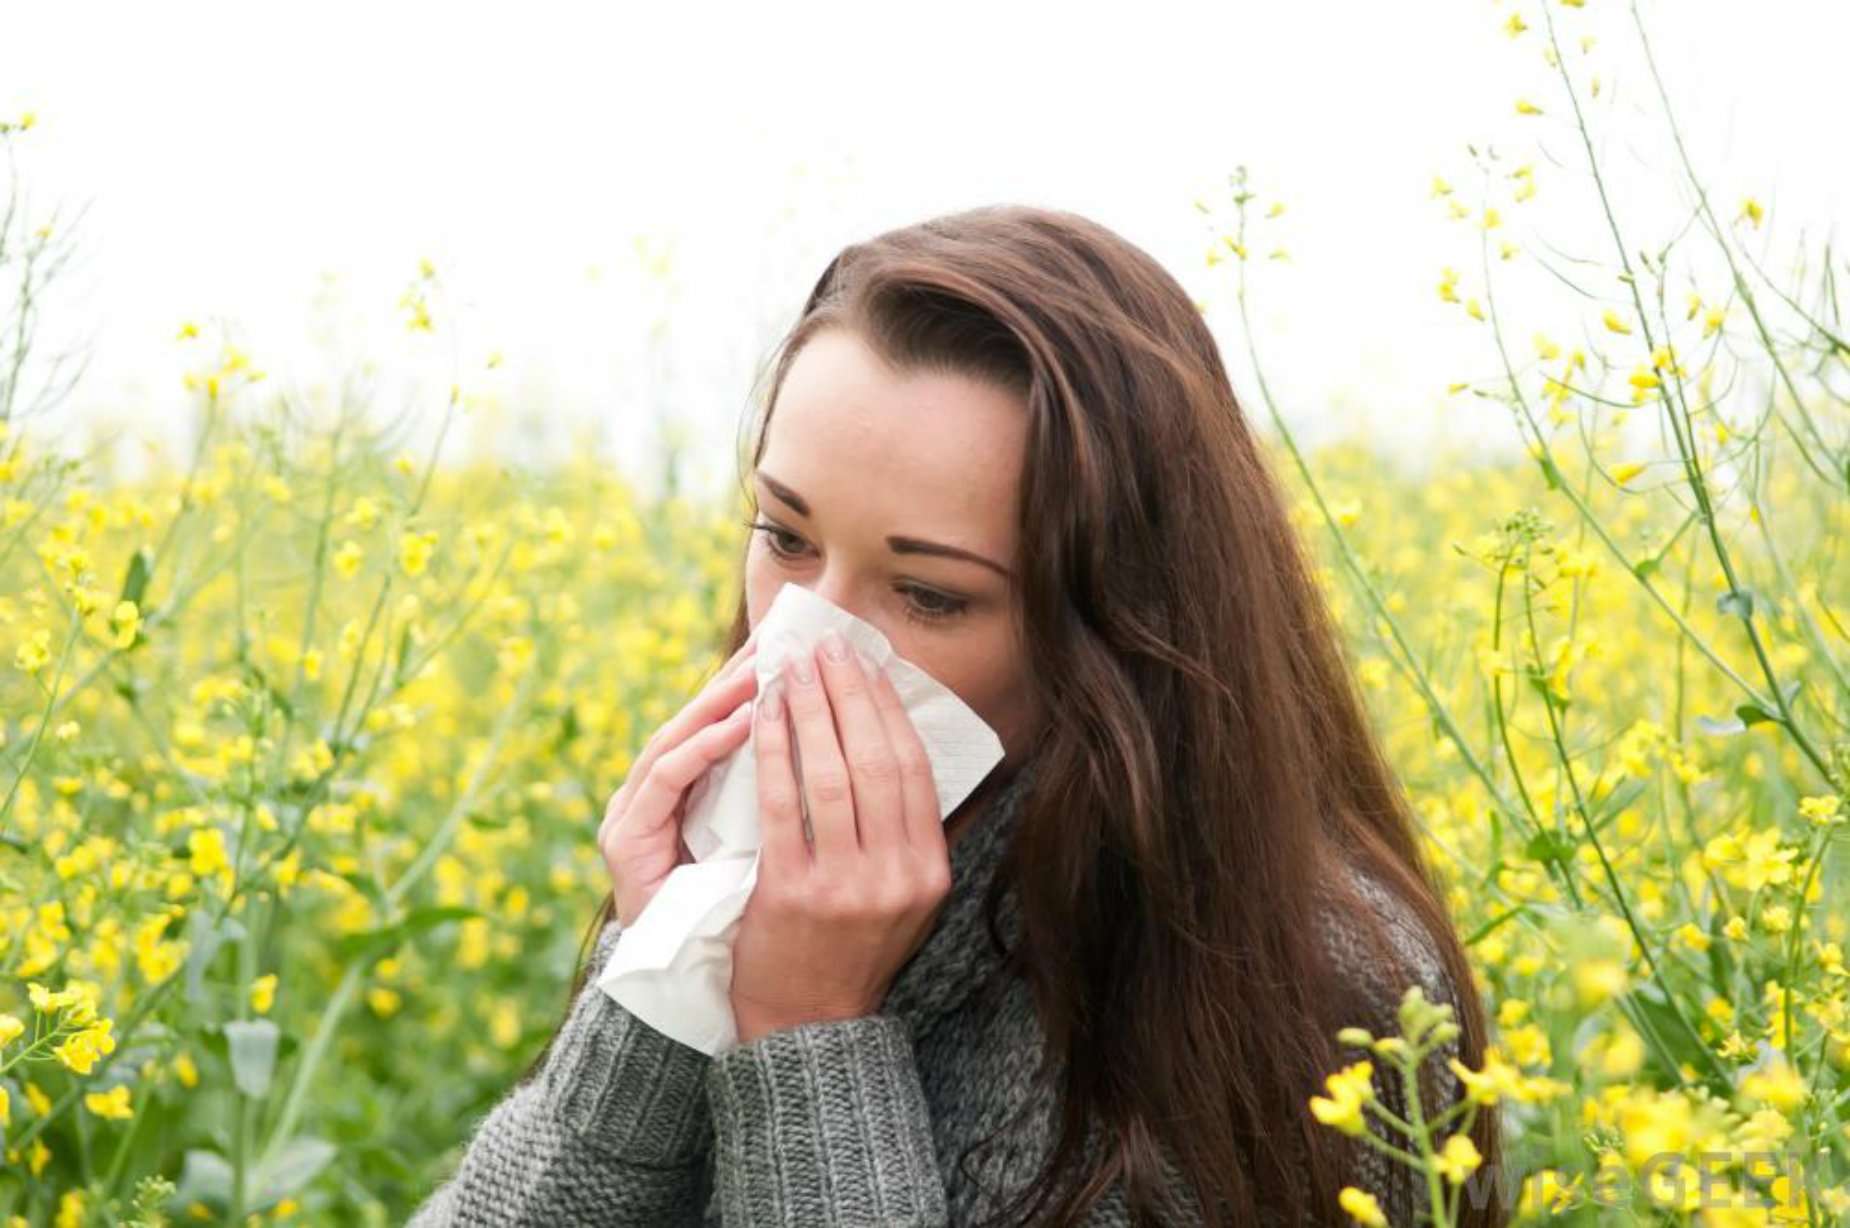 Getting Seasonal Allergies Bad This Year? Its Not Just You